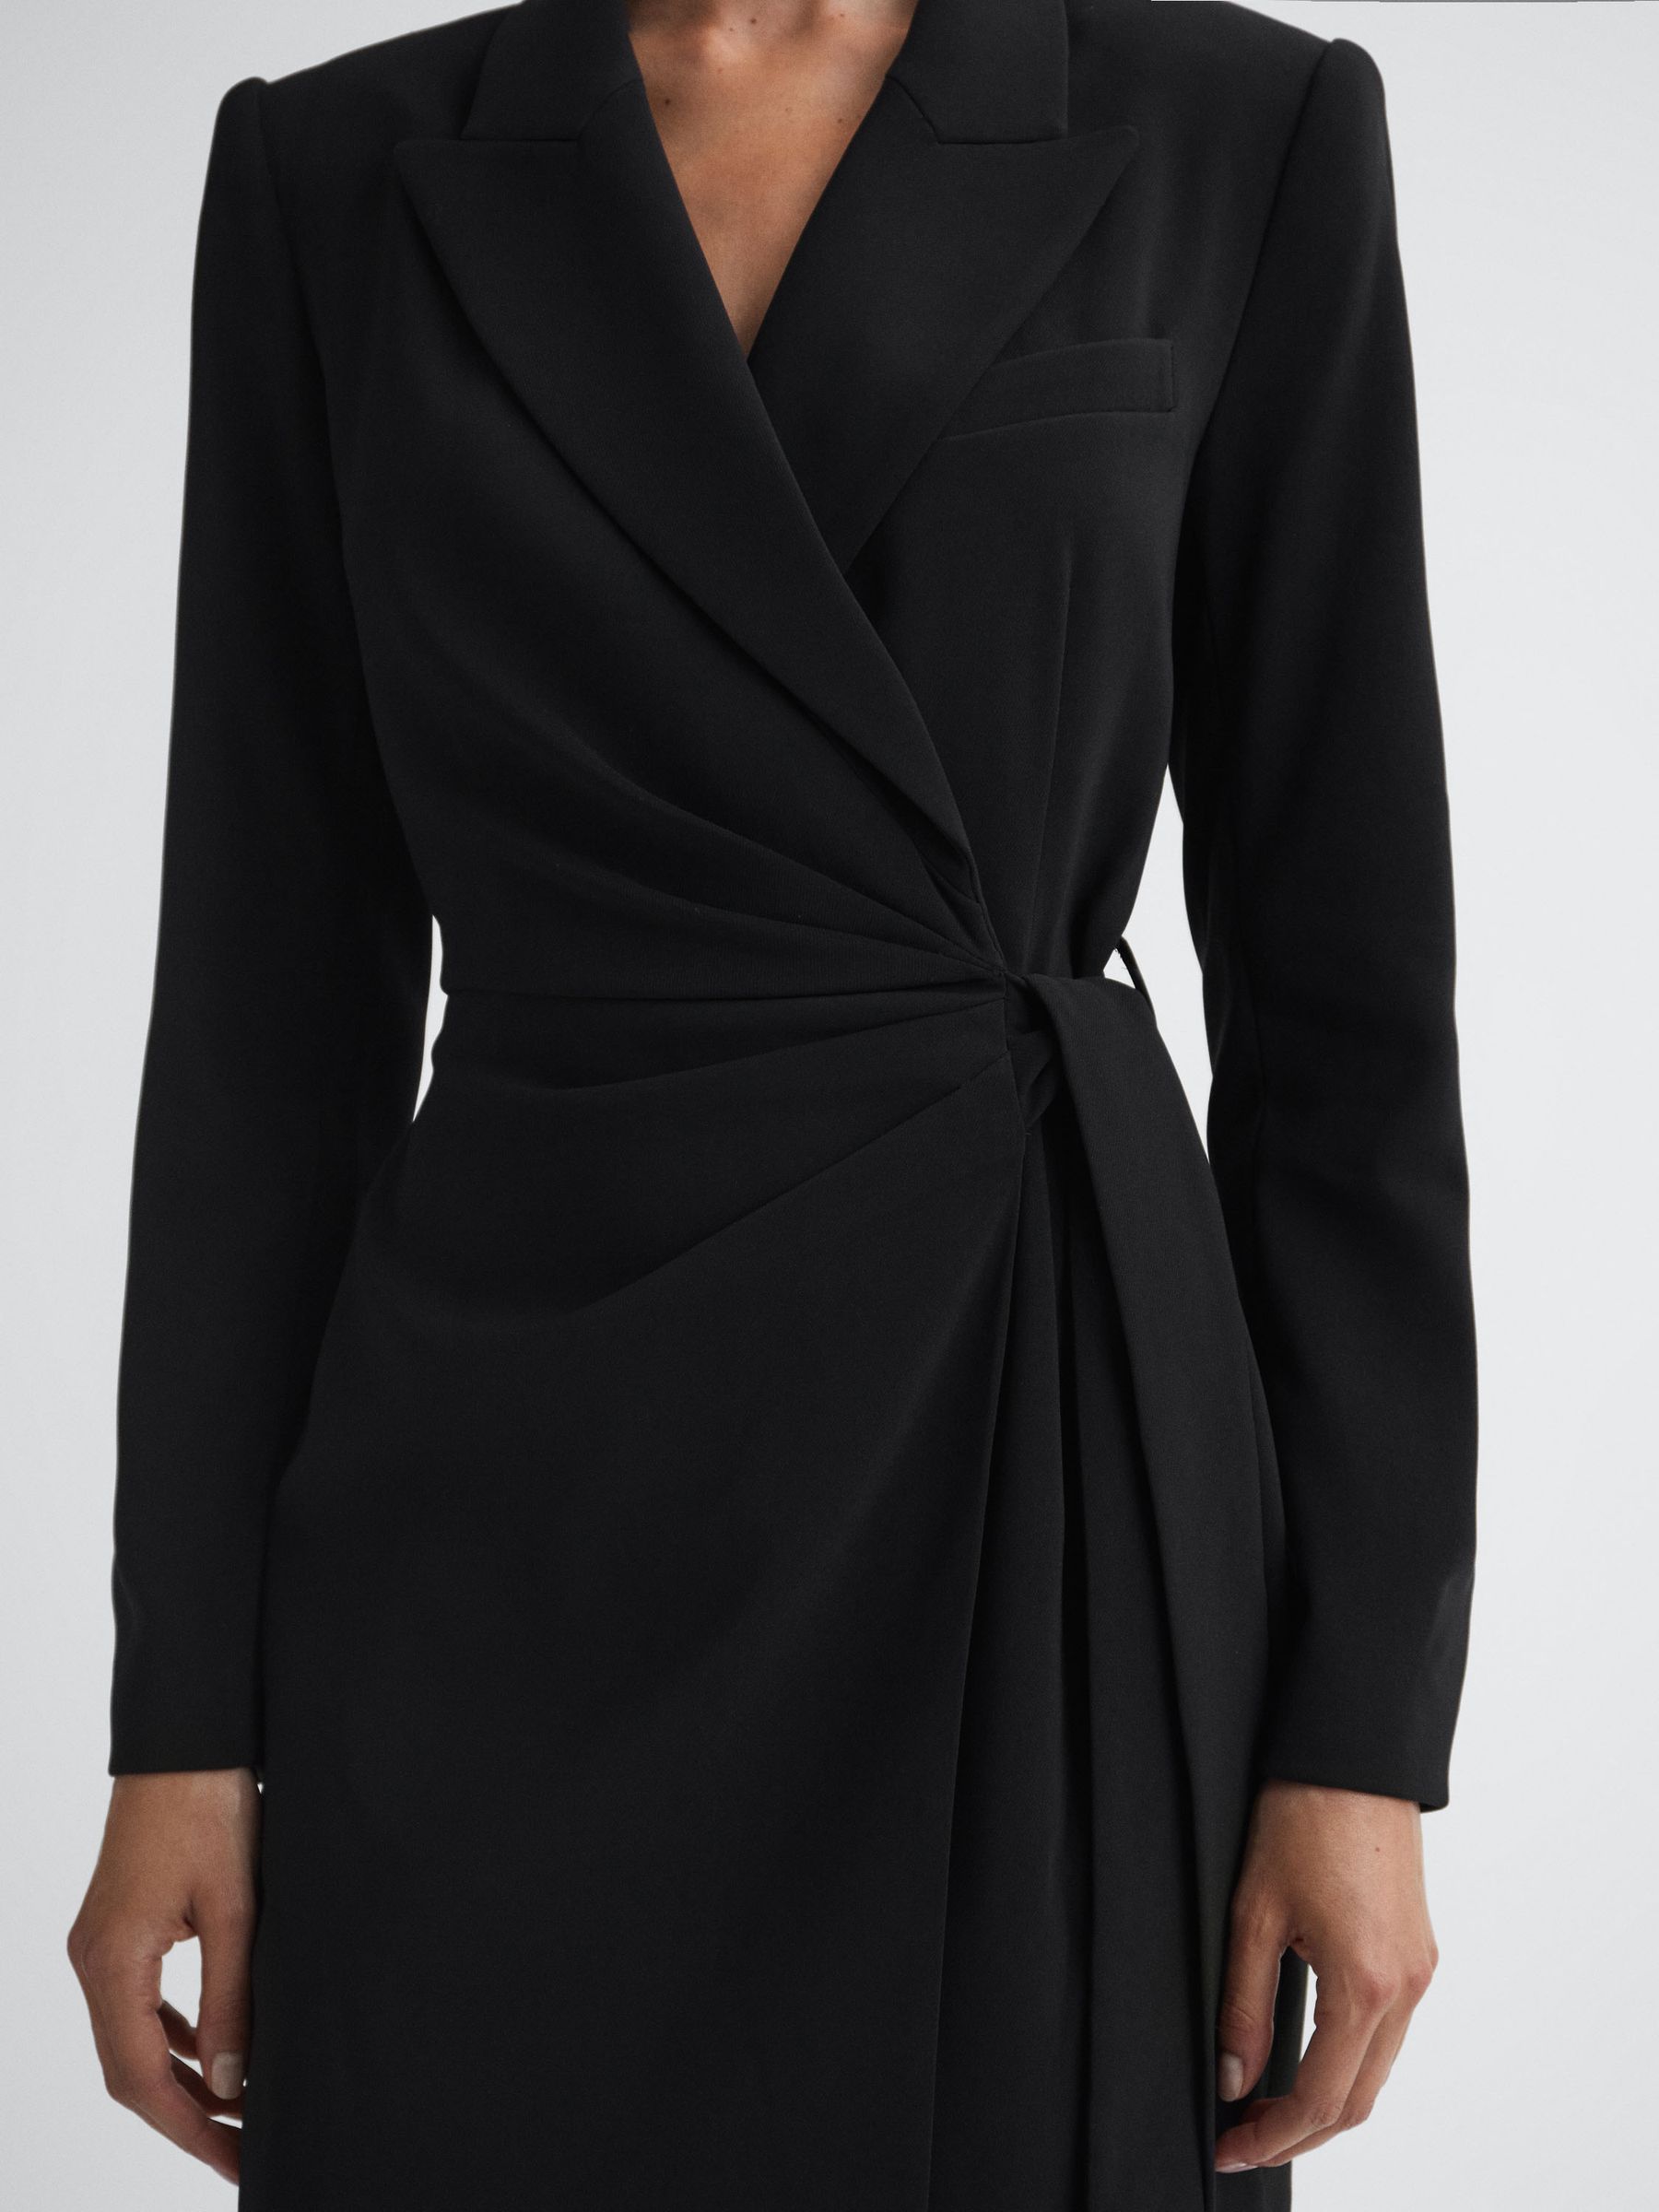 Reiss Peyton Fitted Double Breasted Mini Dress | REISS USA